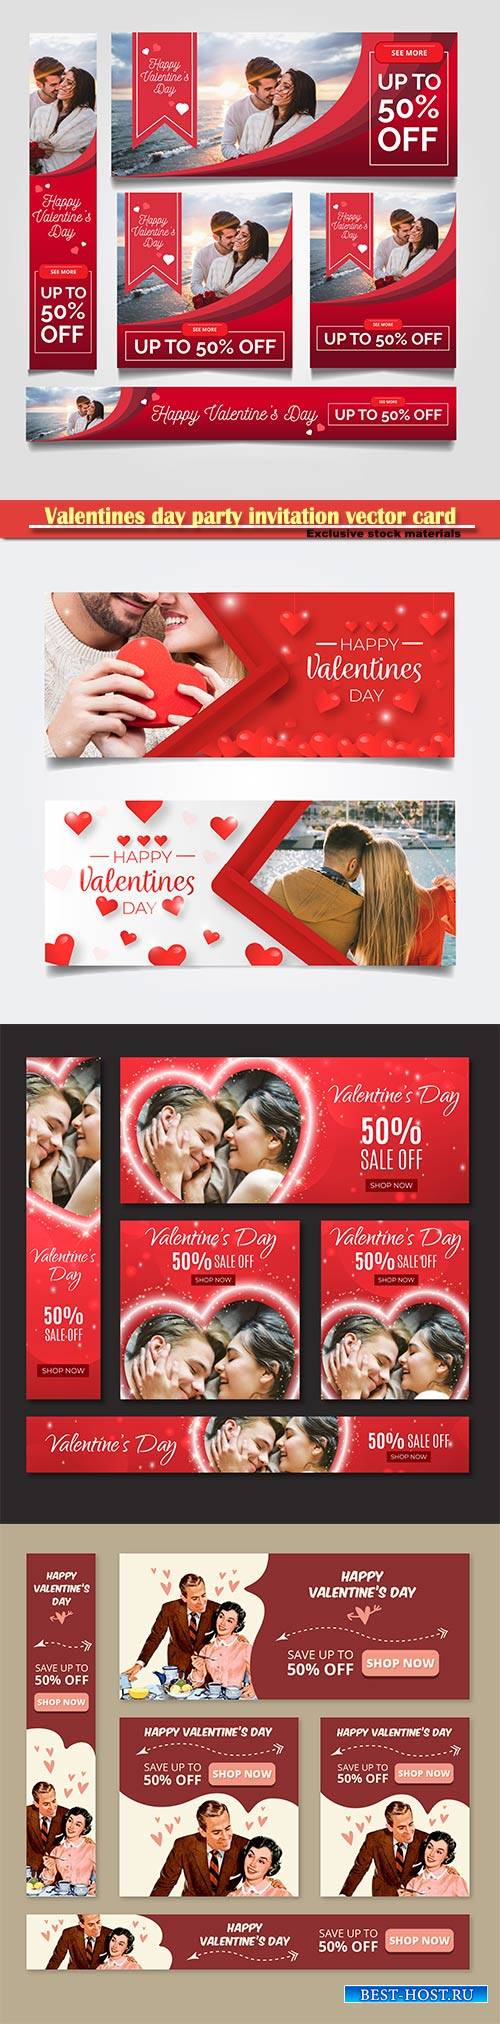 Valentines day party invitation vector card # 56